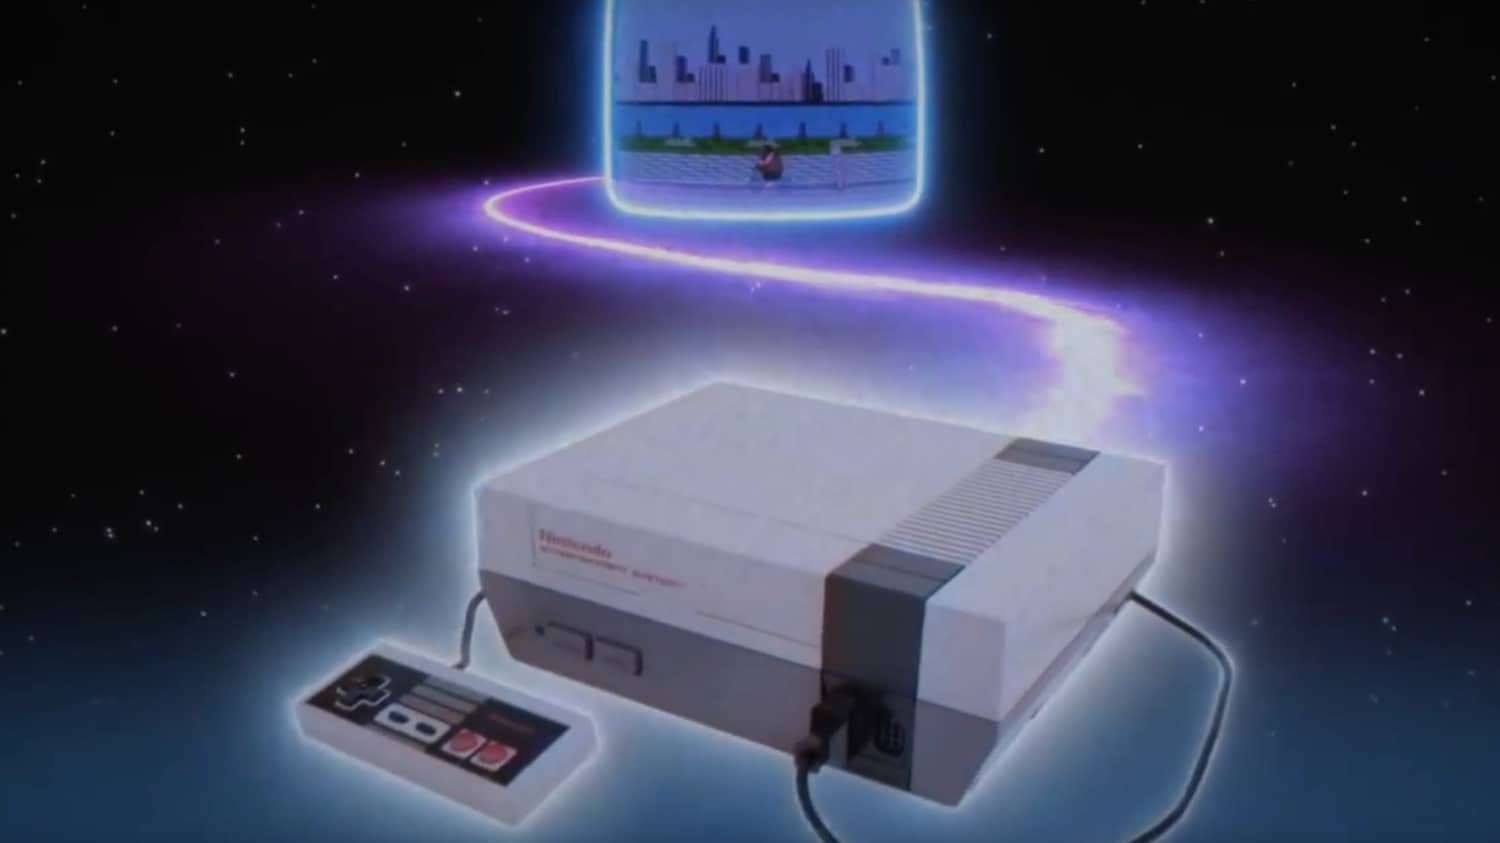 Nintendo Entertainment System,On July 15, 1983, the living room of every family was changed forever. No matter who you were at the time, someone you knew had an NES.